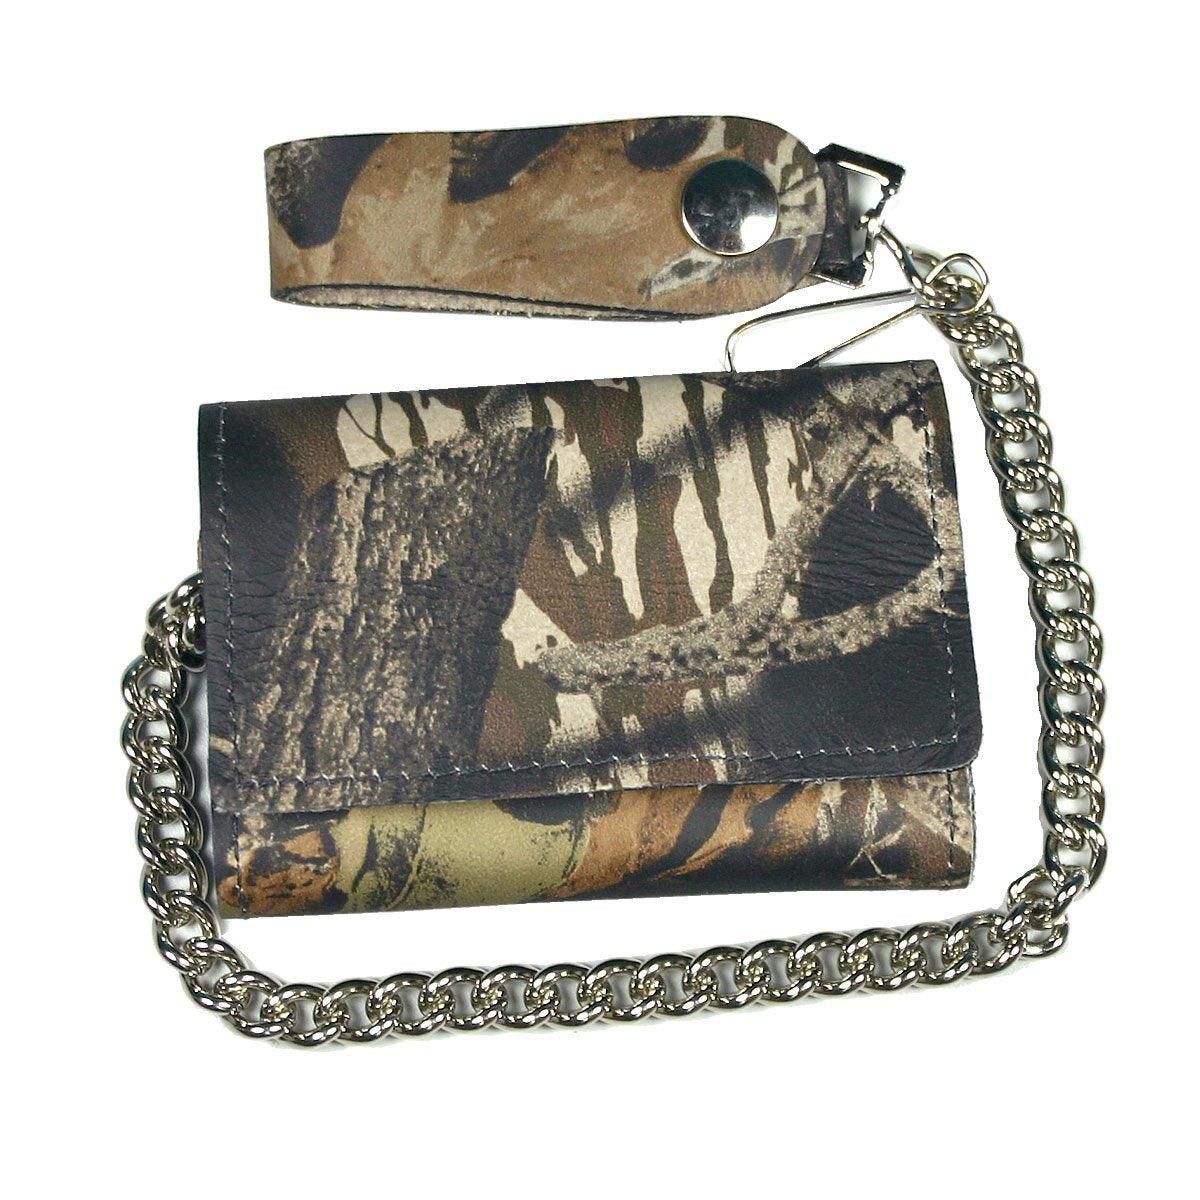 Hot Leathers Tri Fold Wallet Camo With Chain - American Legend Rider